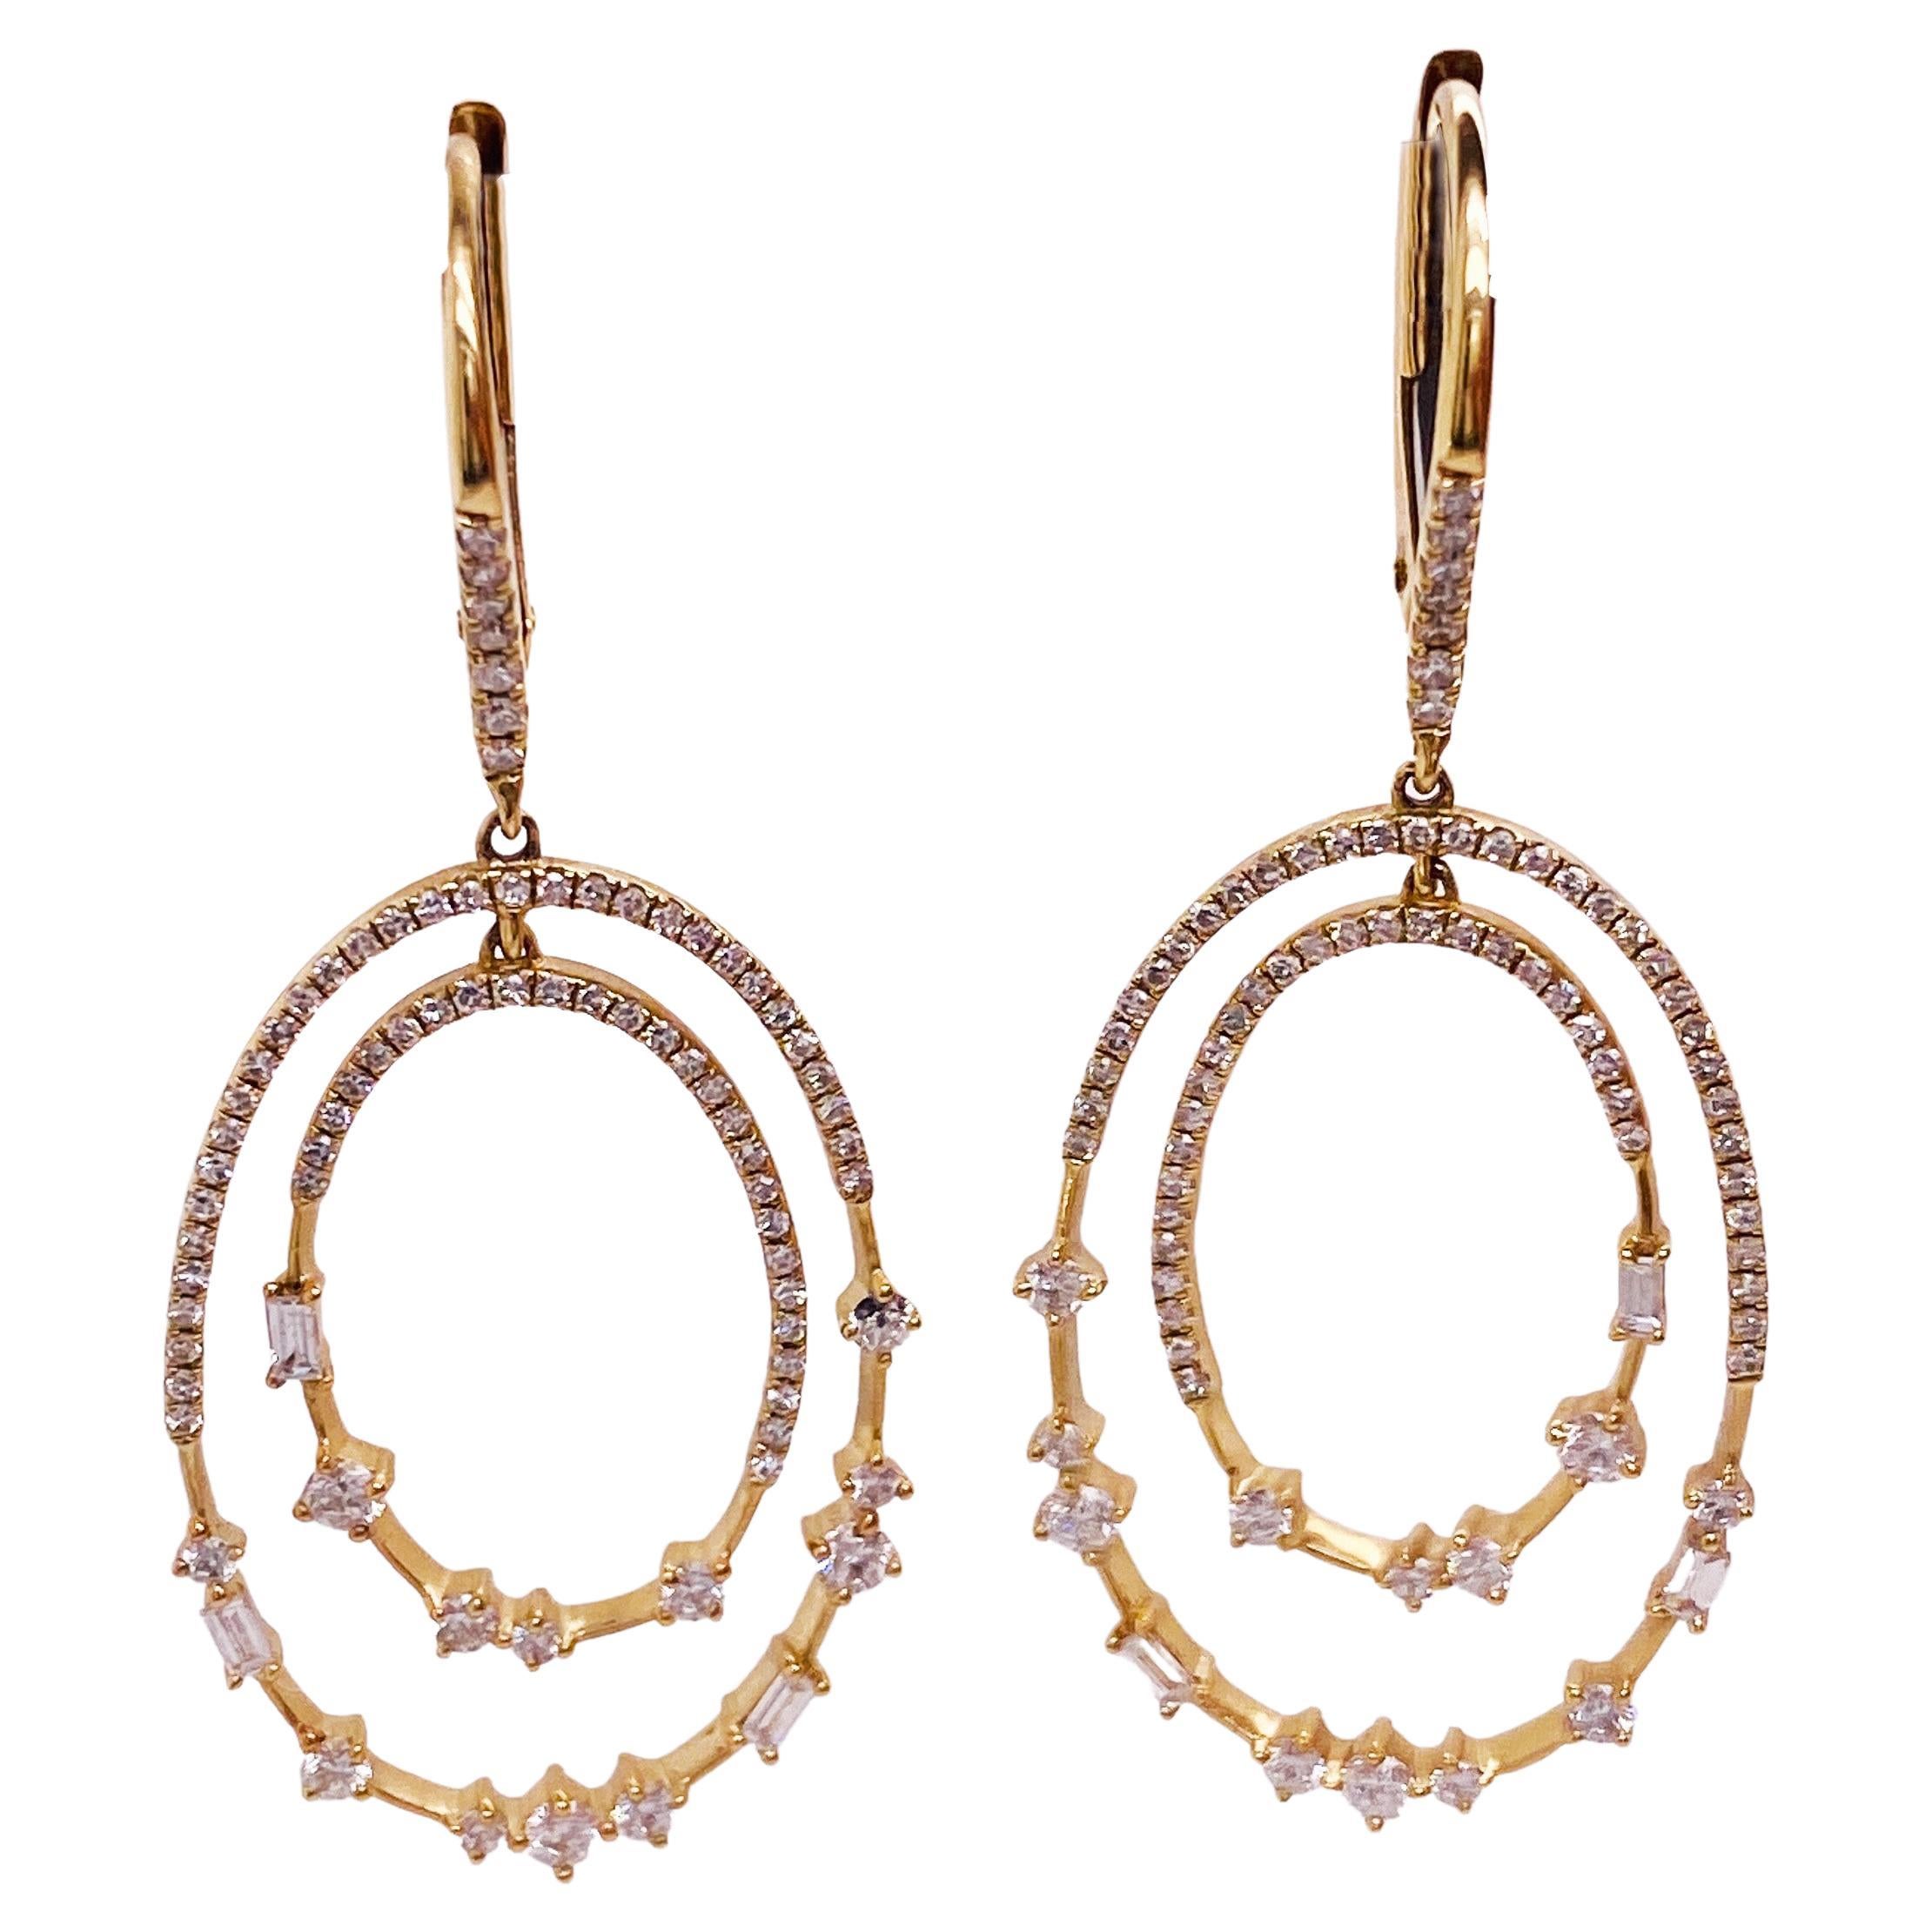 These earrings are a statement piece that will become fast favorites! Pair these lovelies with any outfit to add a perfect sparkle. The two diamond-covered ovals are linked to allow their own sway for a beautiful bit of sass and extra sparkle. The